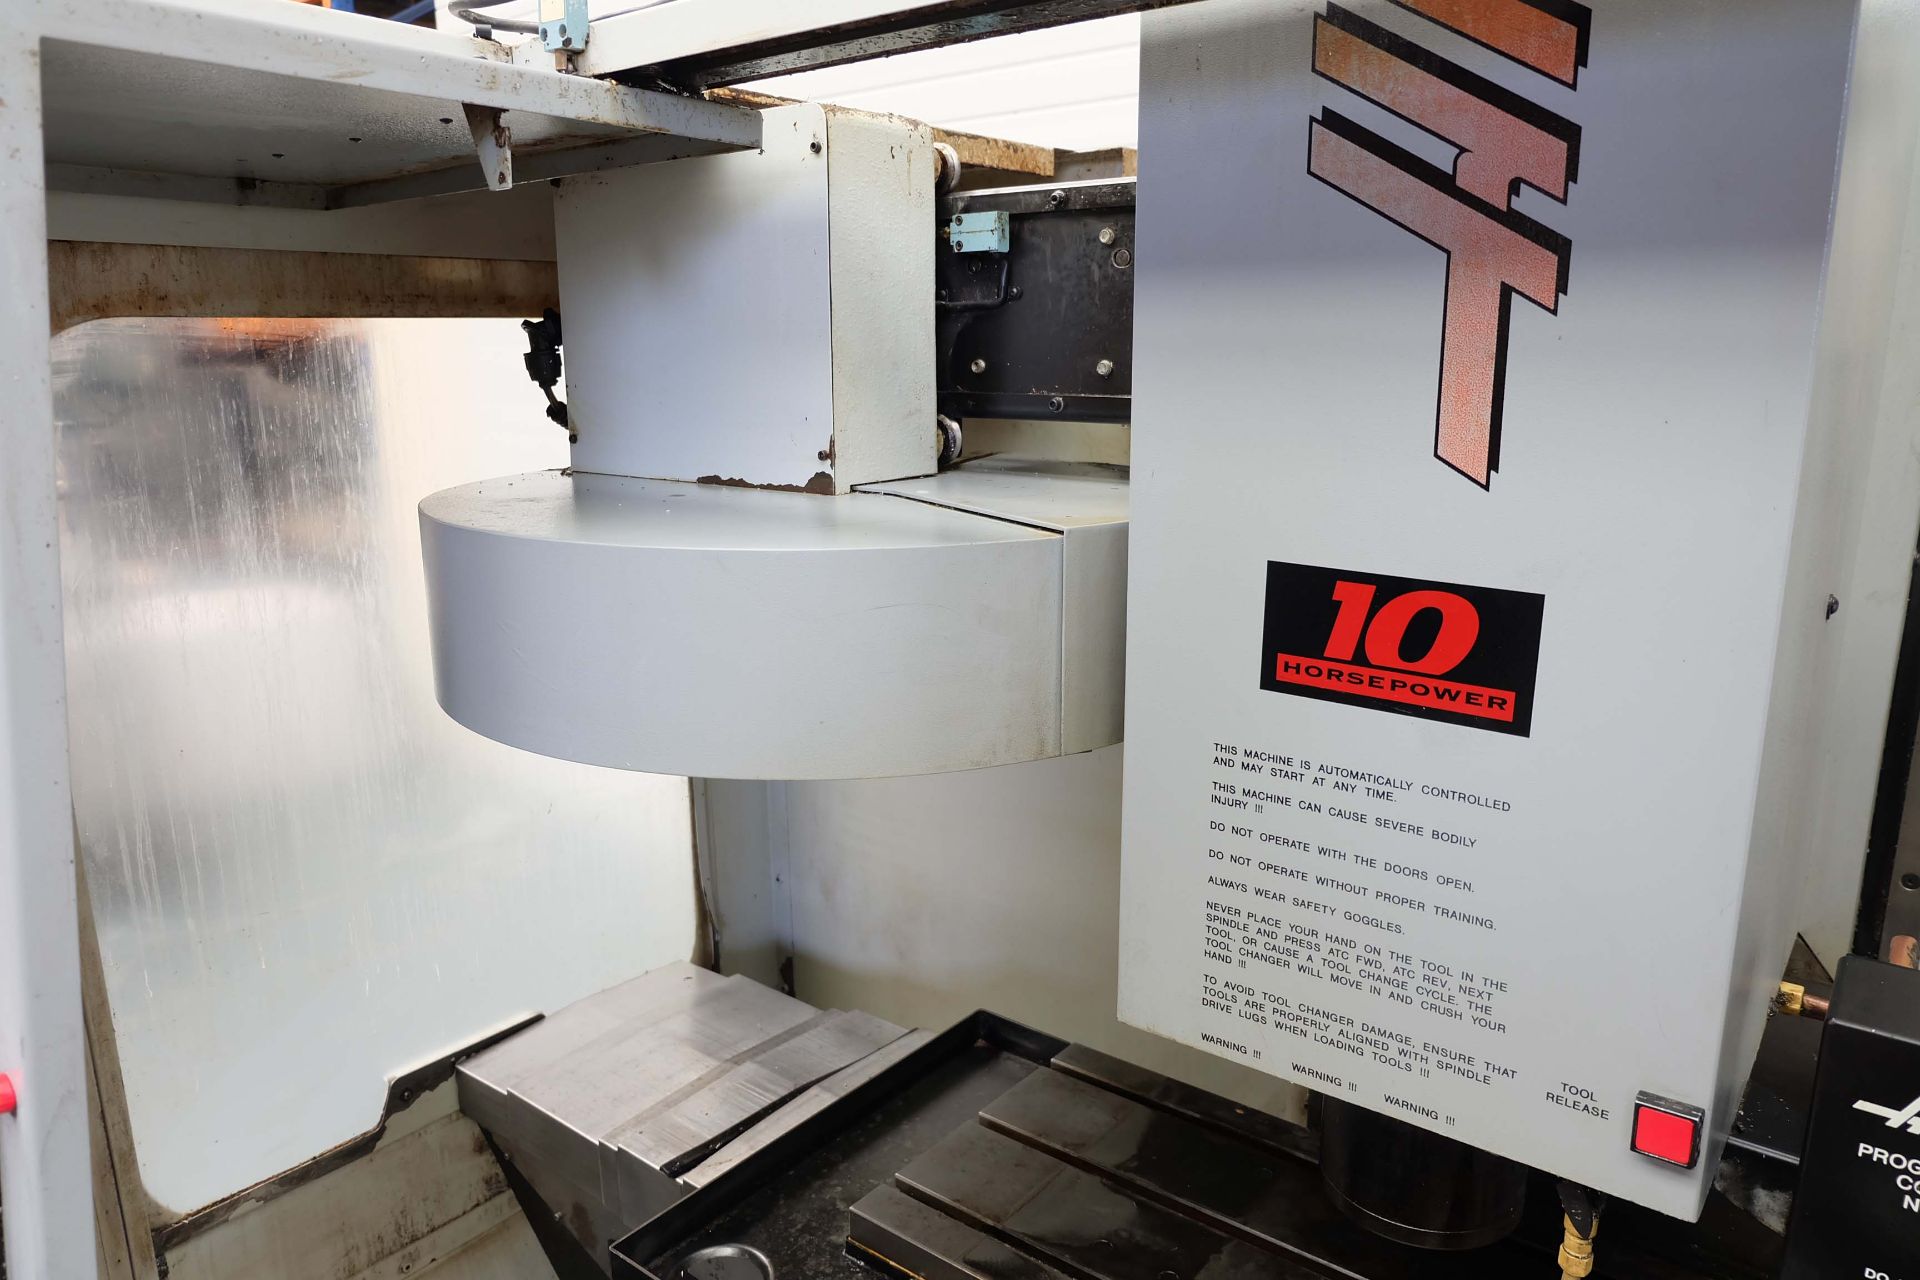 HAAS Model 2 Three Axis Vertical Maching Centre With 20 Station Auto Tool Changer. Table Size: 36" x - Image 6 of 13